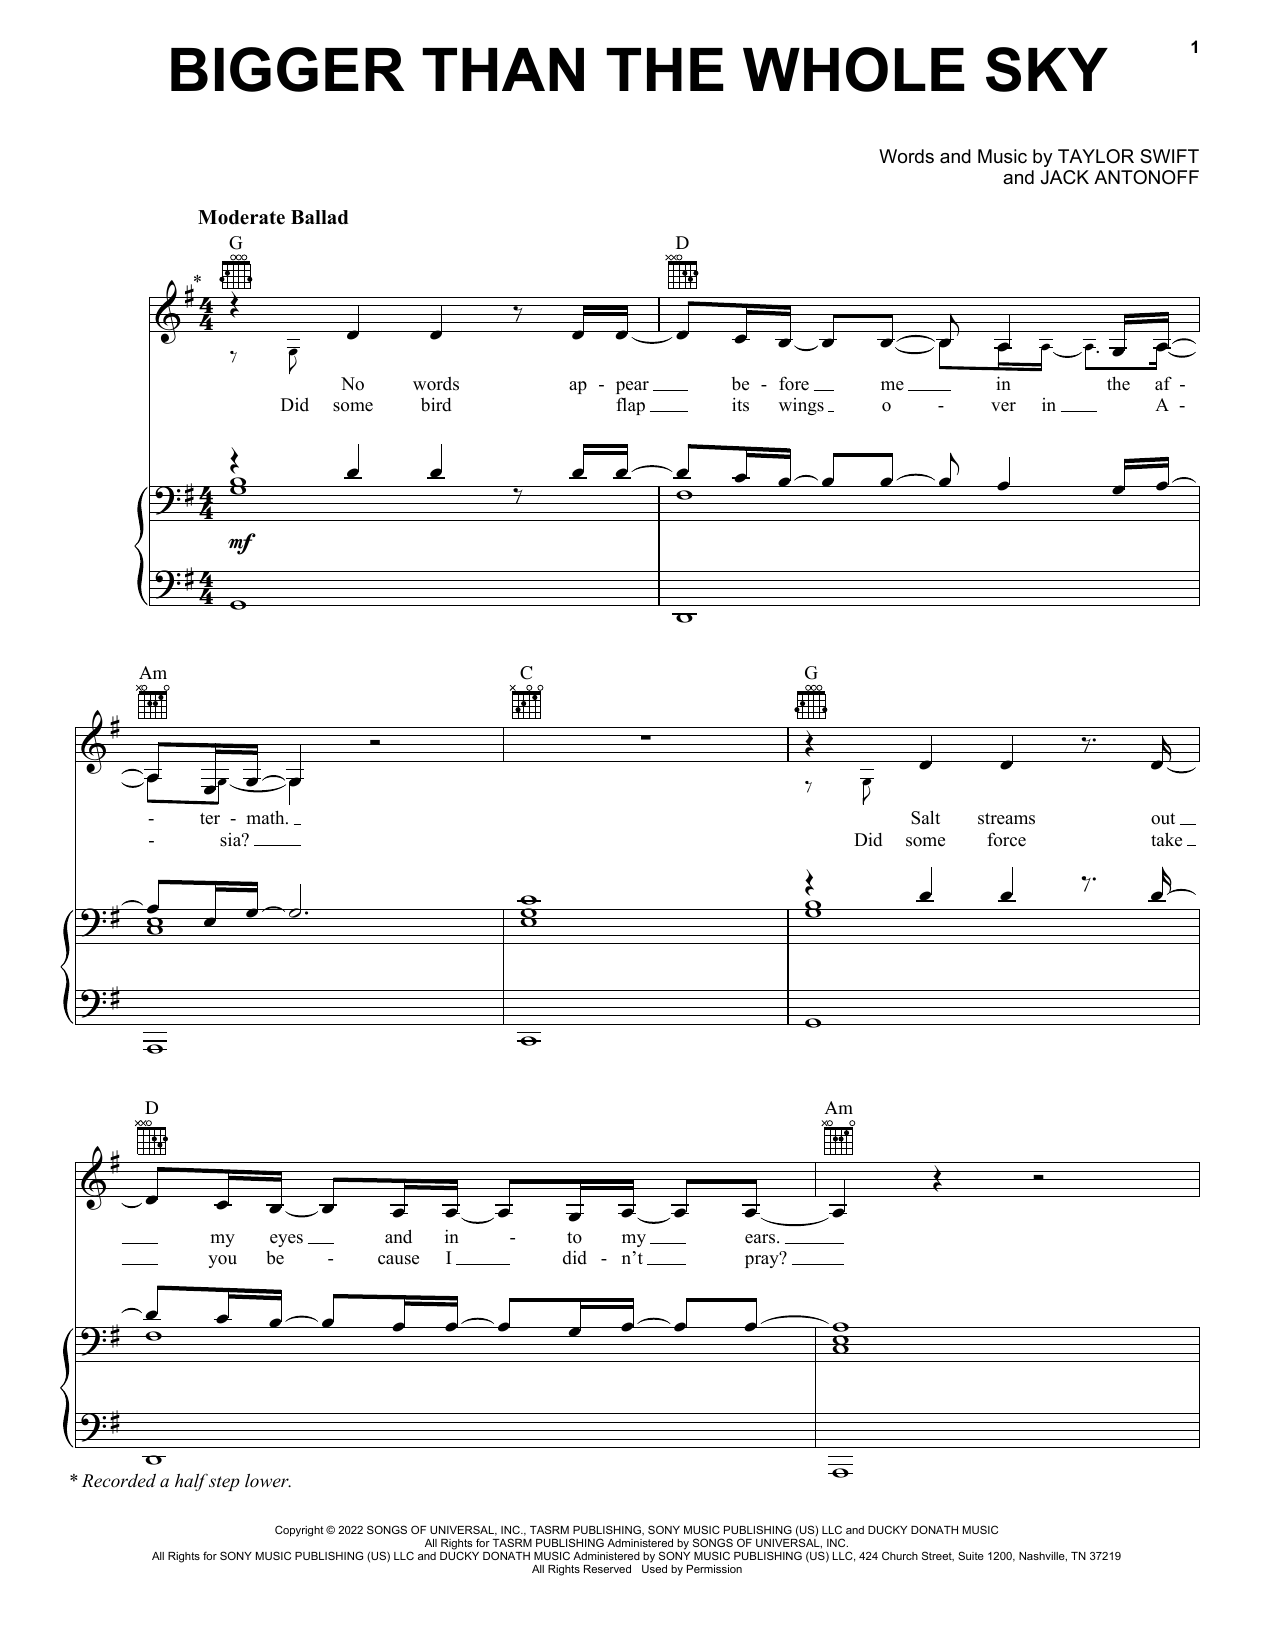 Taylor Swift Bigger Than The Whole Sky sheet music notes printable PDF score